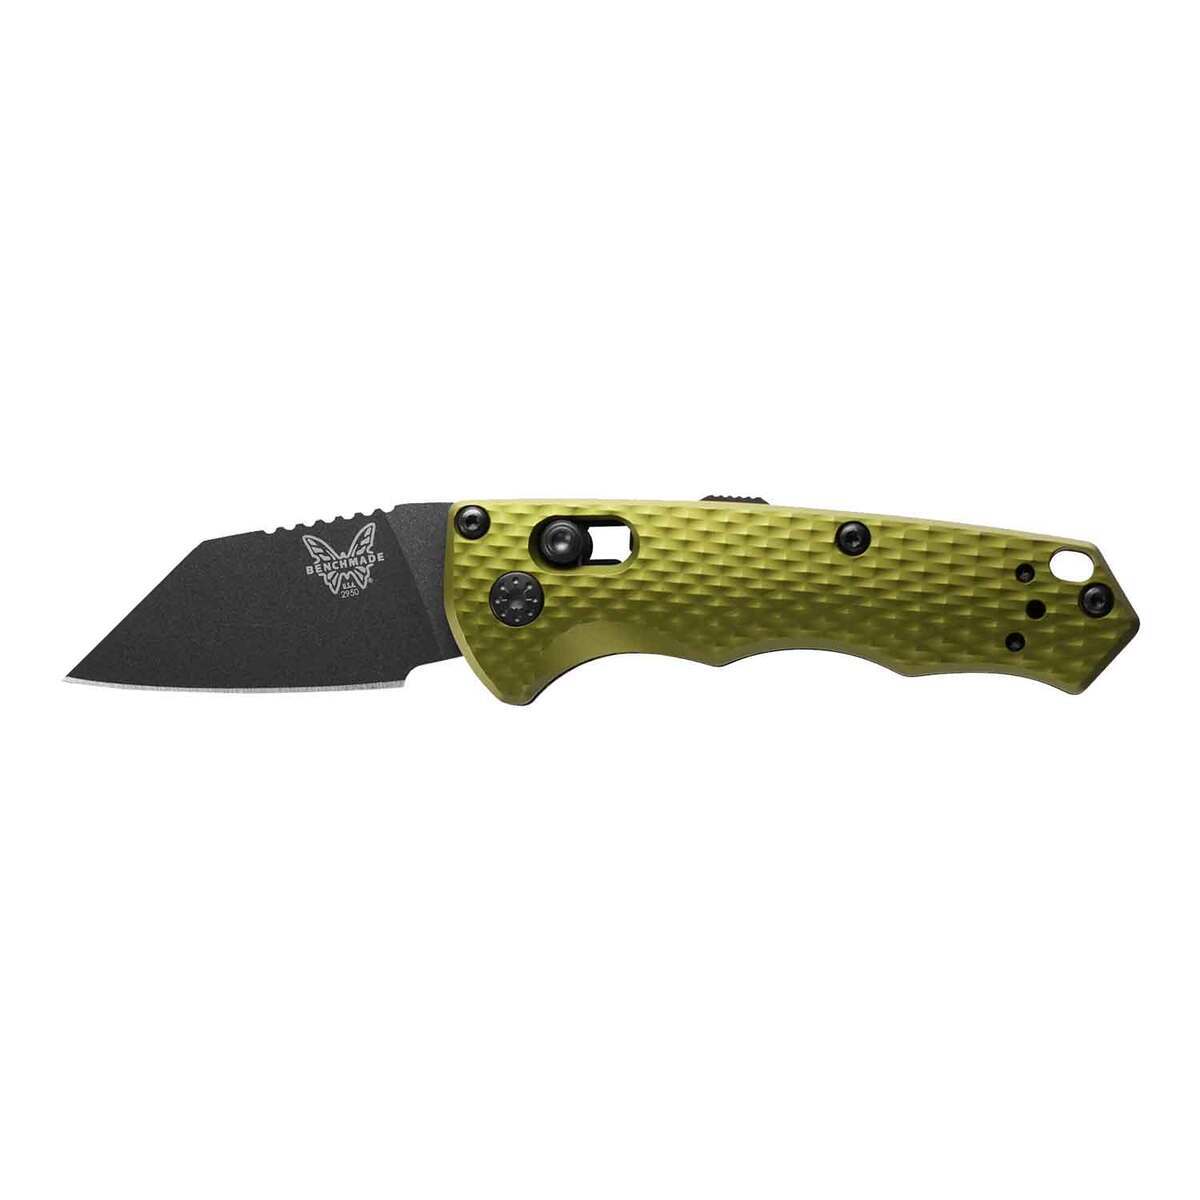 Benchmade Partial Auto Immunity 1.95 inch Automatic Knife | Sportsman's ...